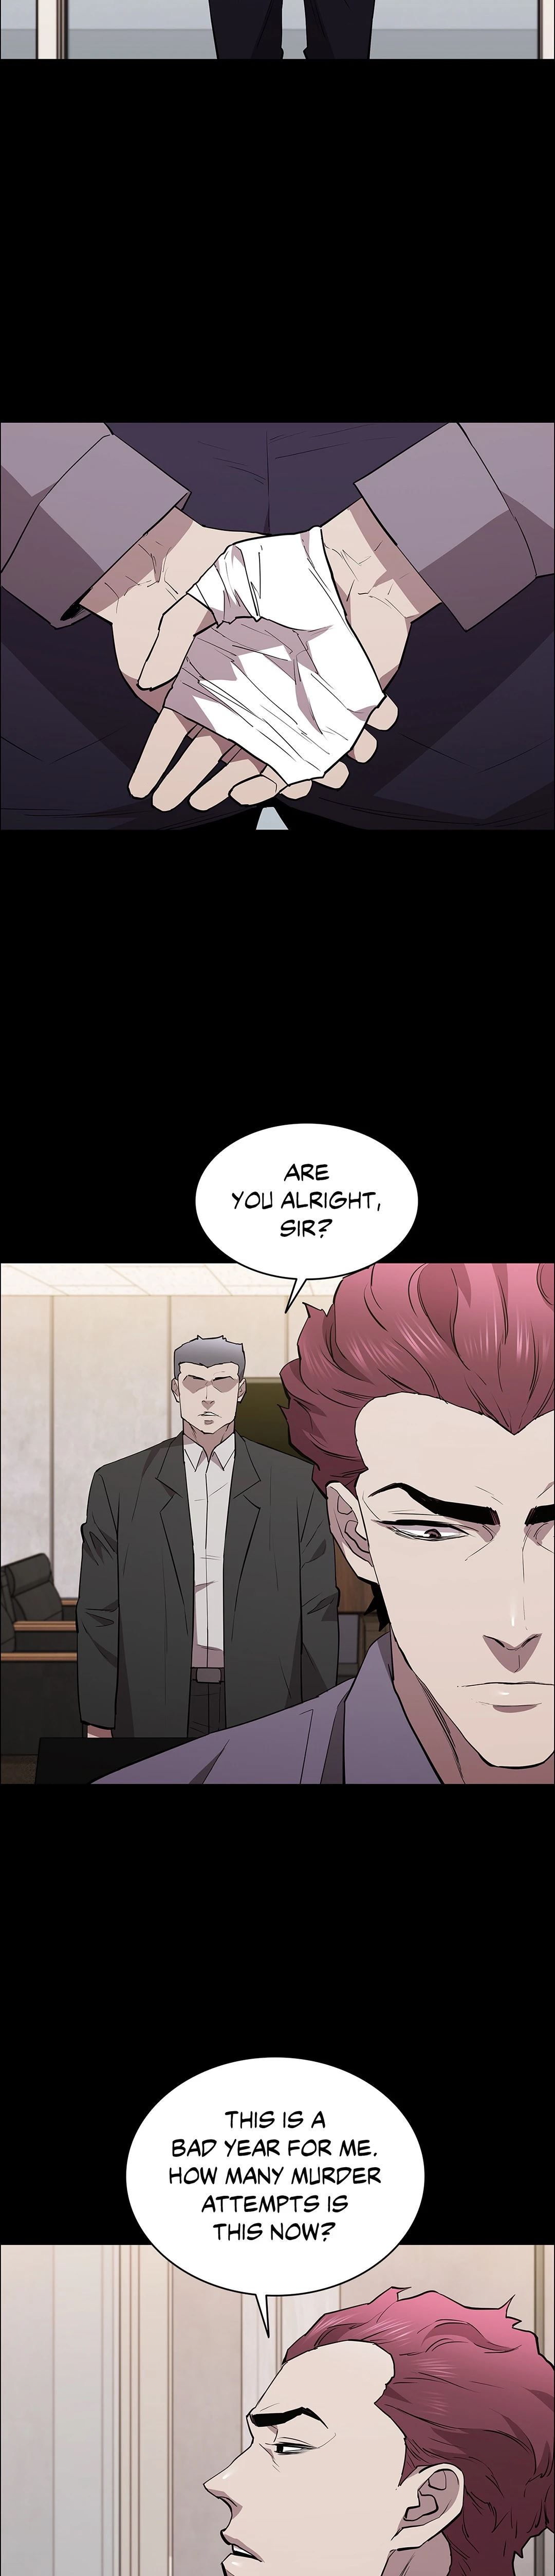 Thorns on Innocence - Chapter 40 Page 8